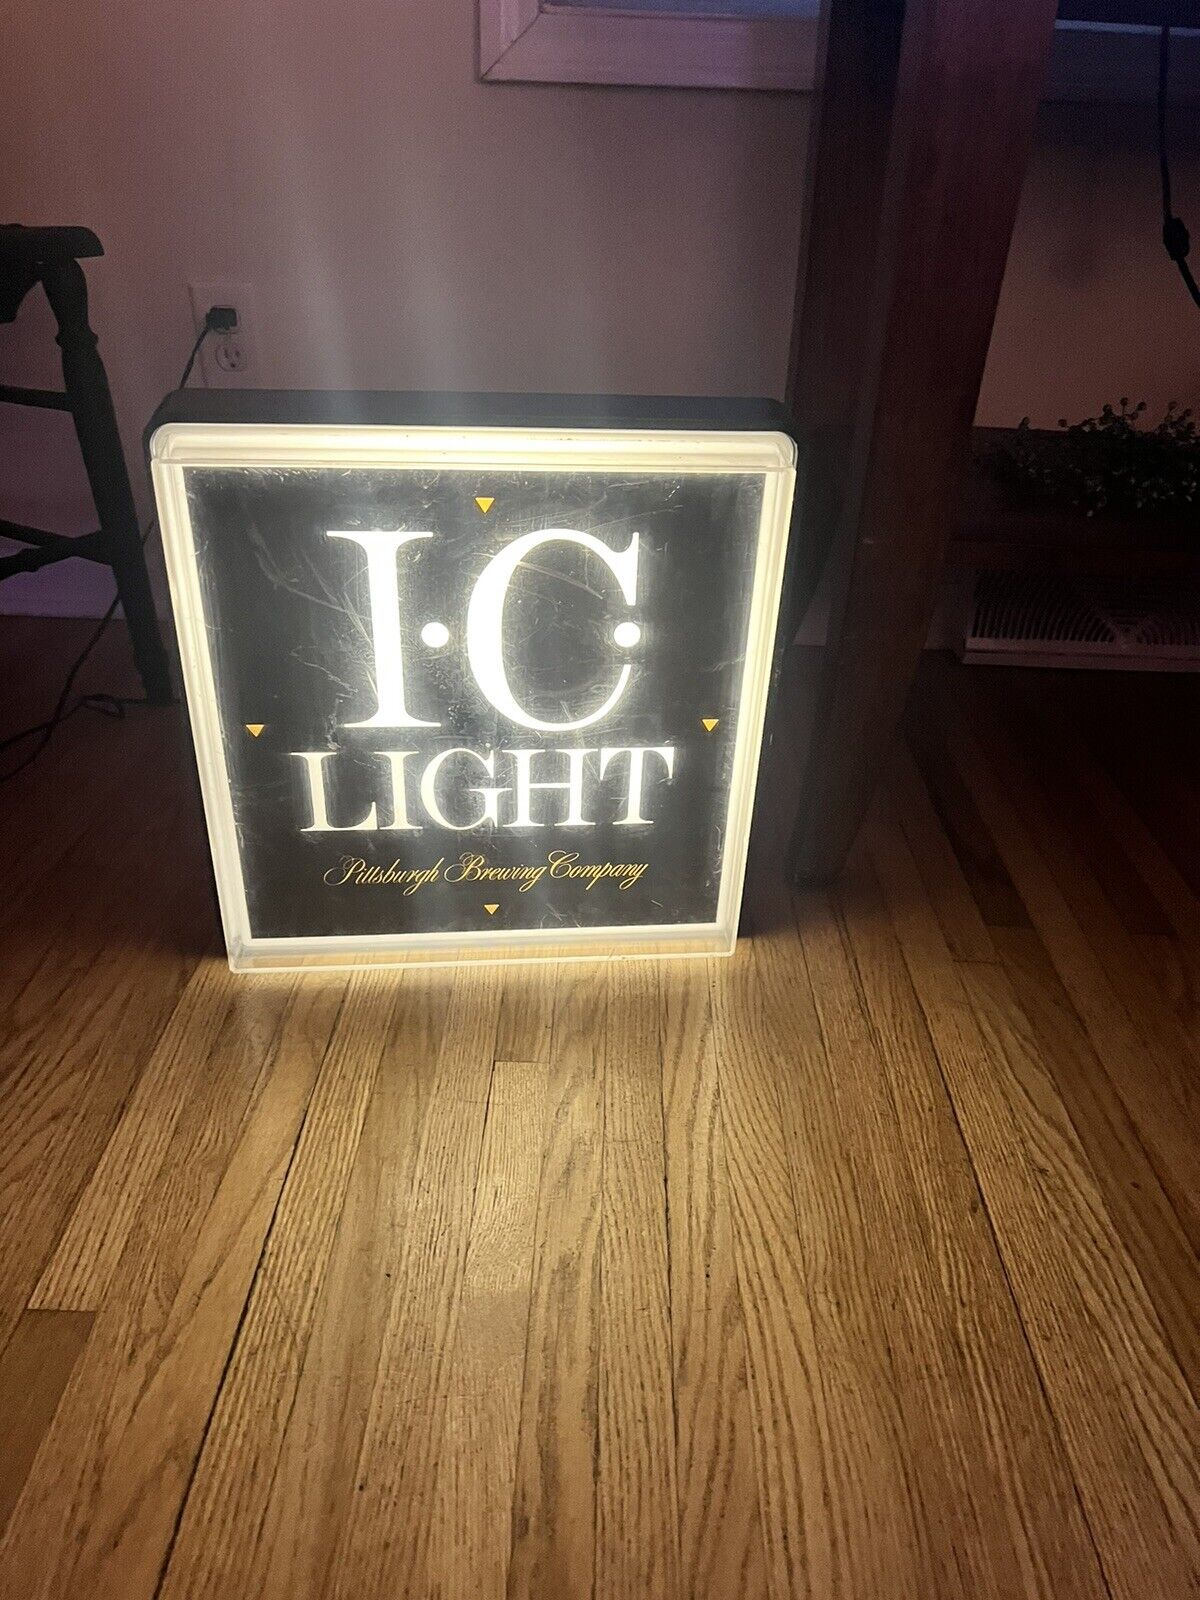 VINTAGE I.C.LIGHT LIGHTED PITTSBURGH BREWING COMPANY BEER SIGN